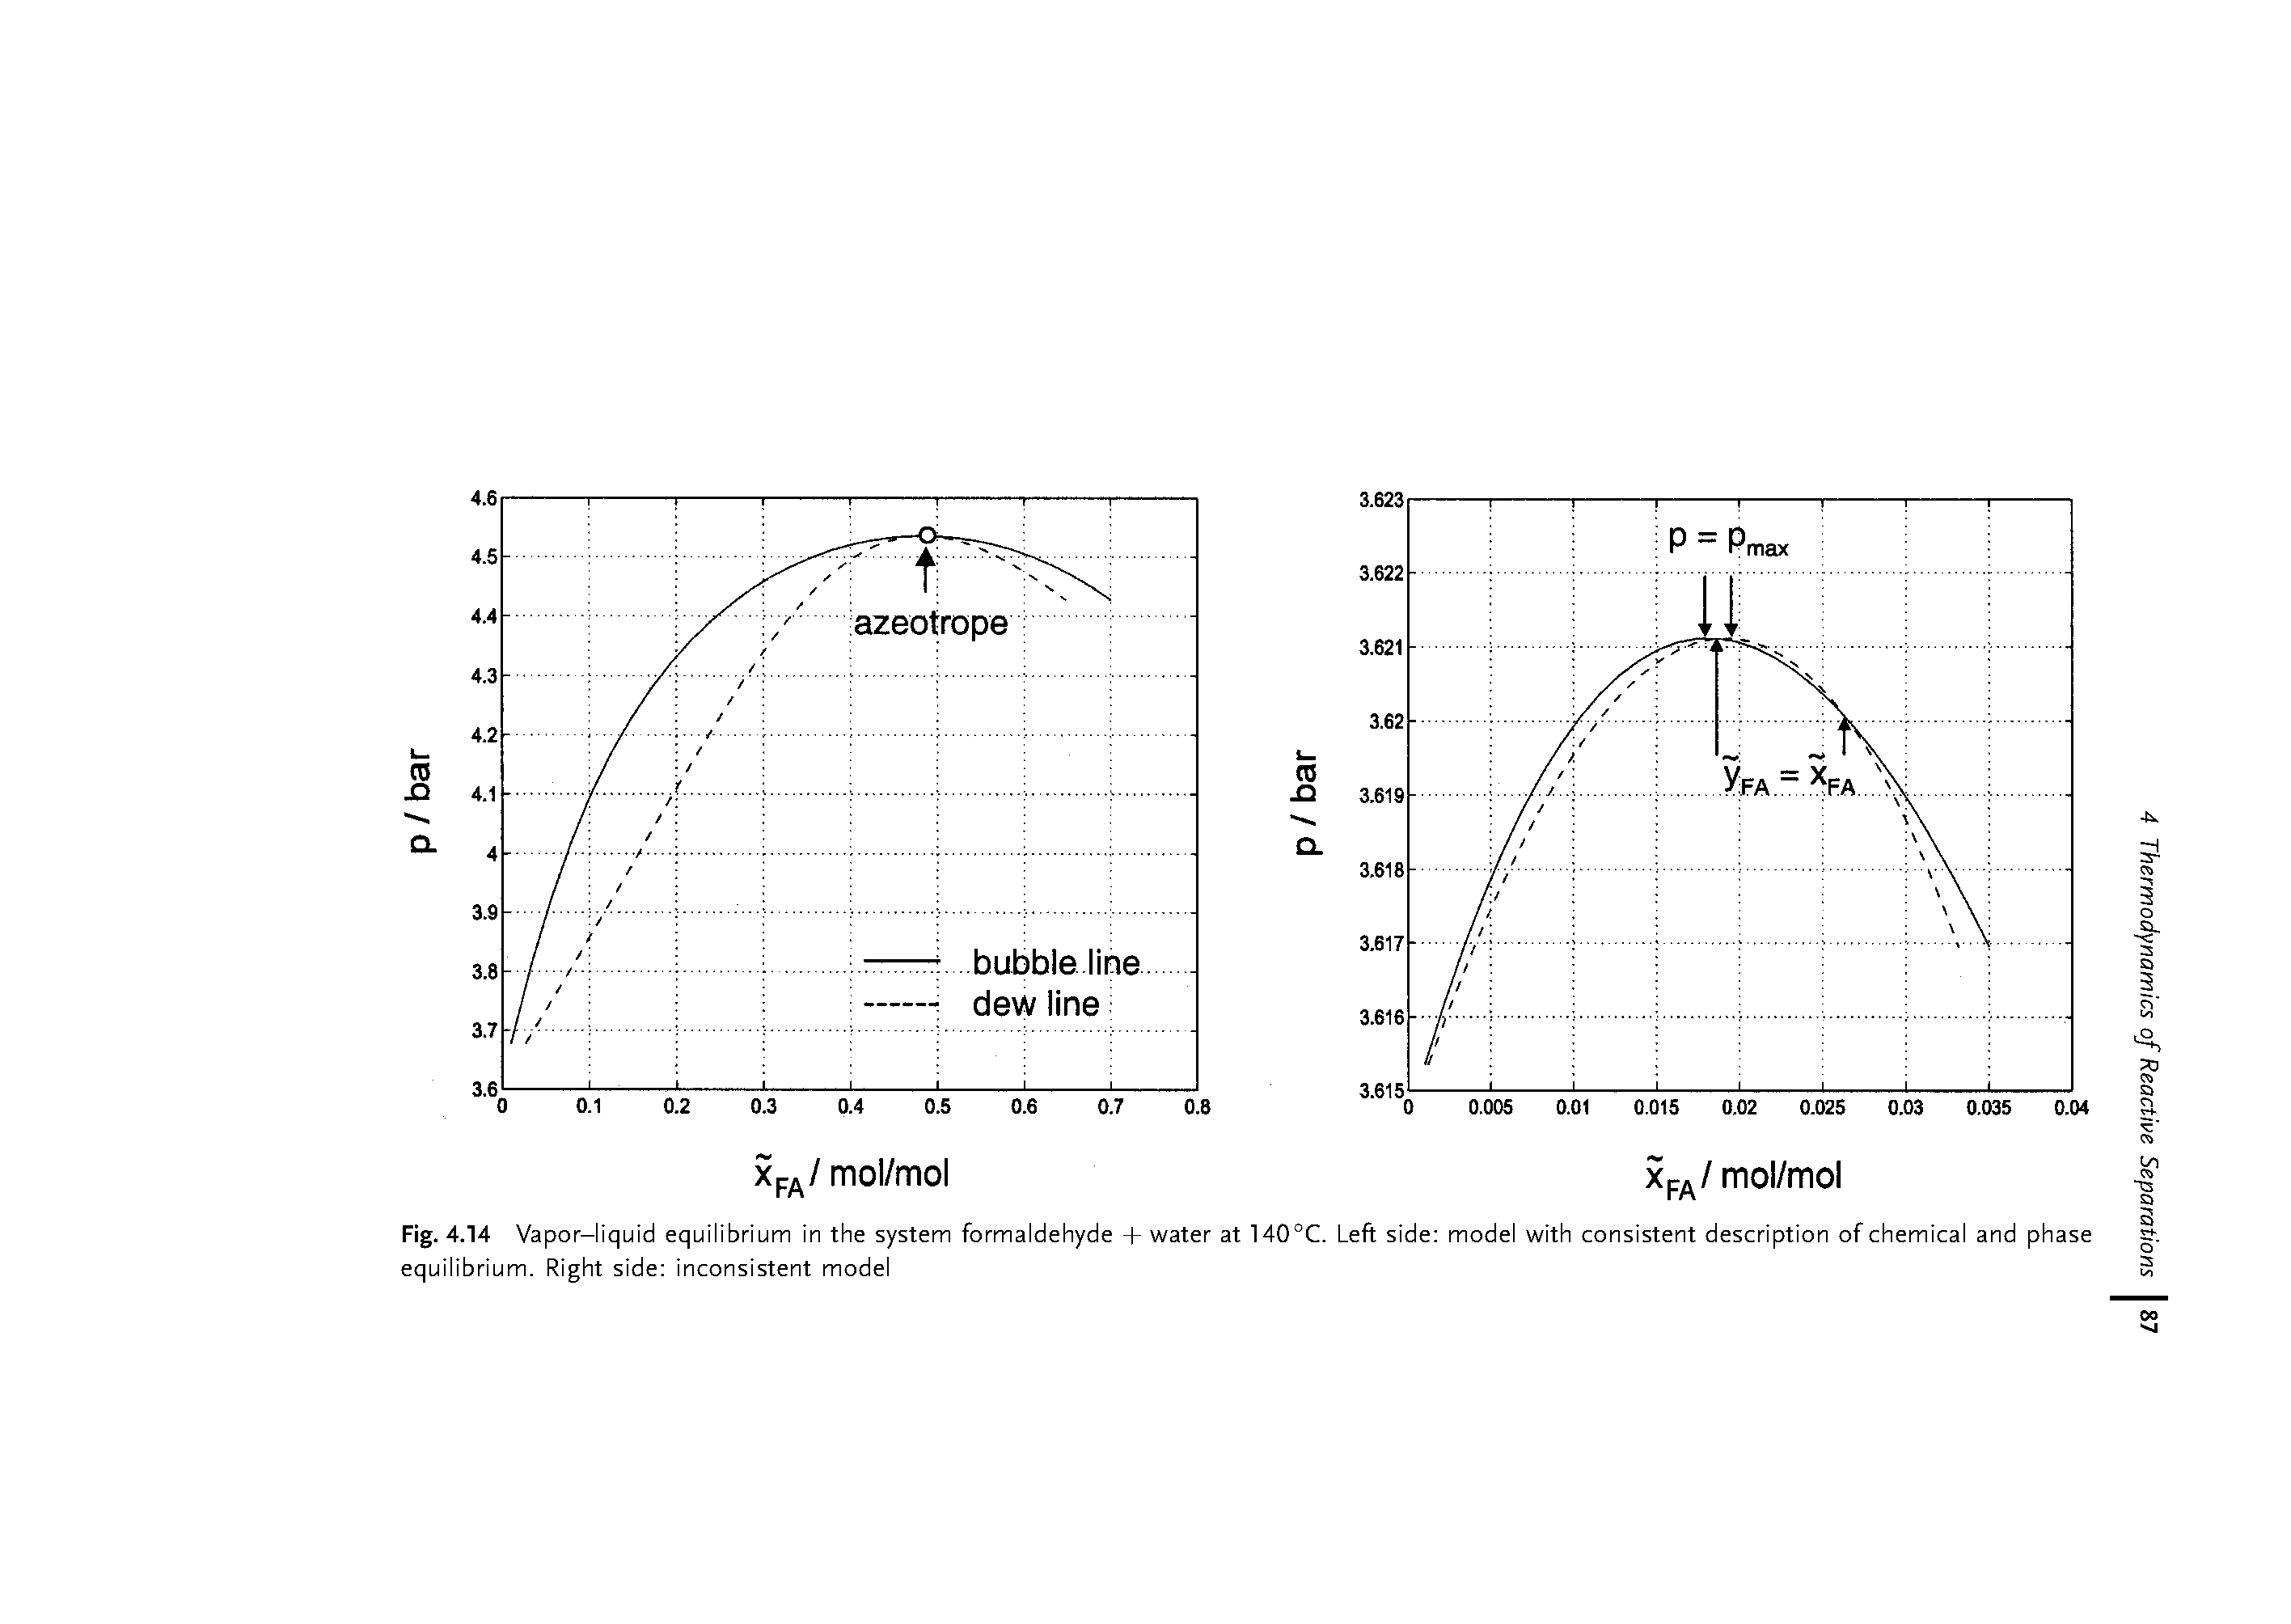 Fig. 4.14 Vapor-liquid equilibrium in the system formaldehyde + water at 140°C. Left side model with consistent description of chemical and phase equilibrium. Right side inconsistent model...